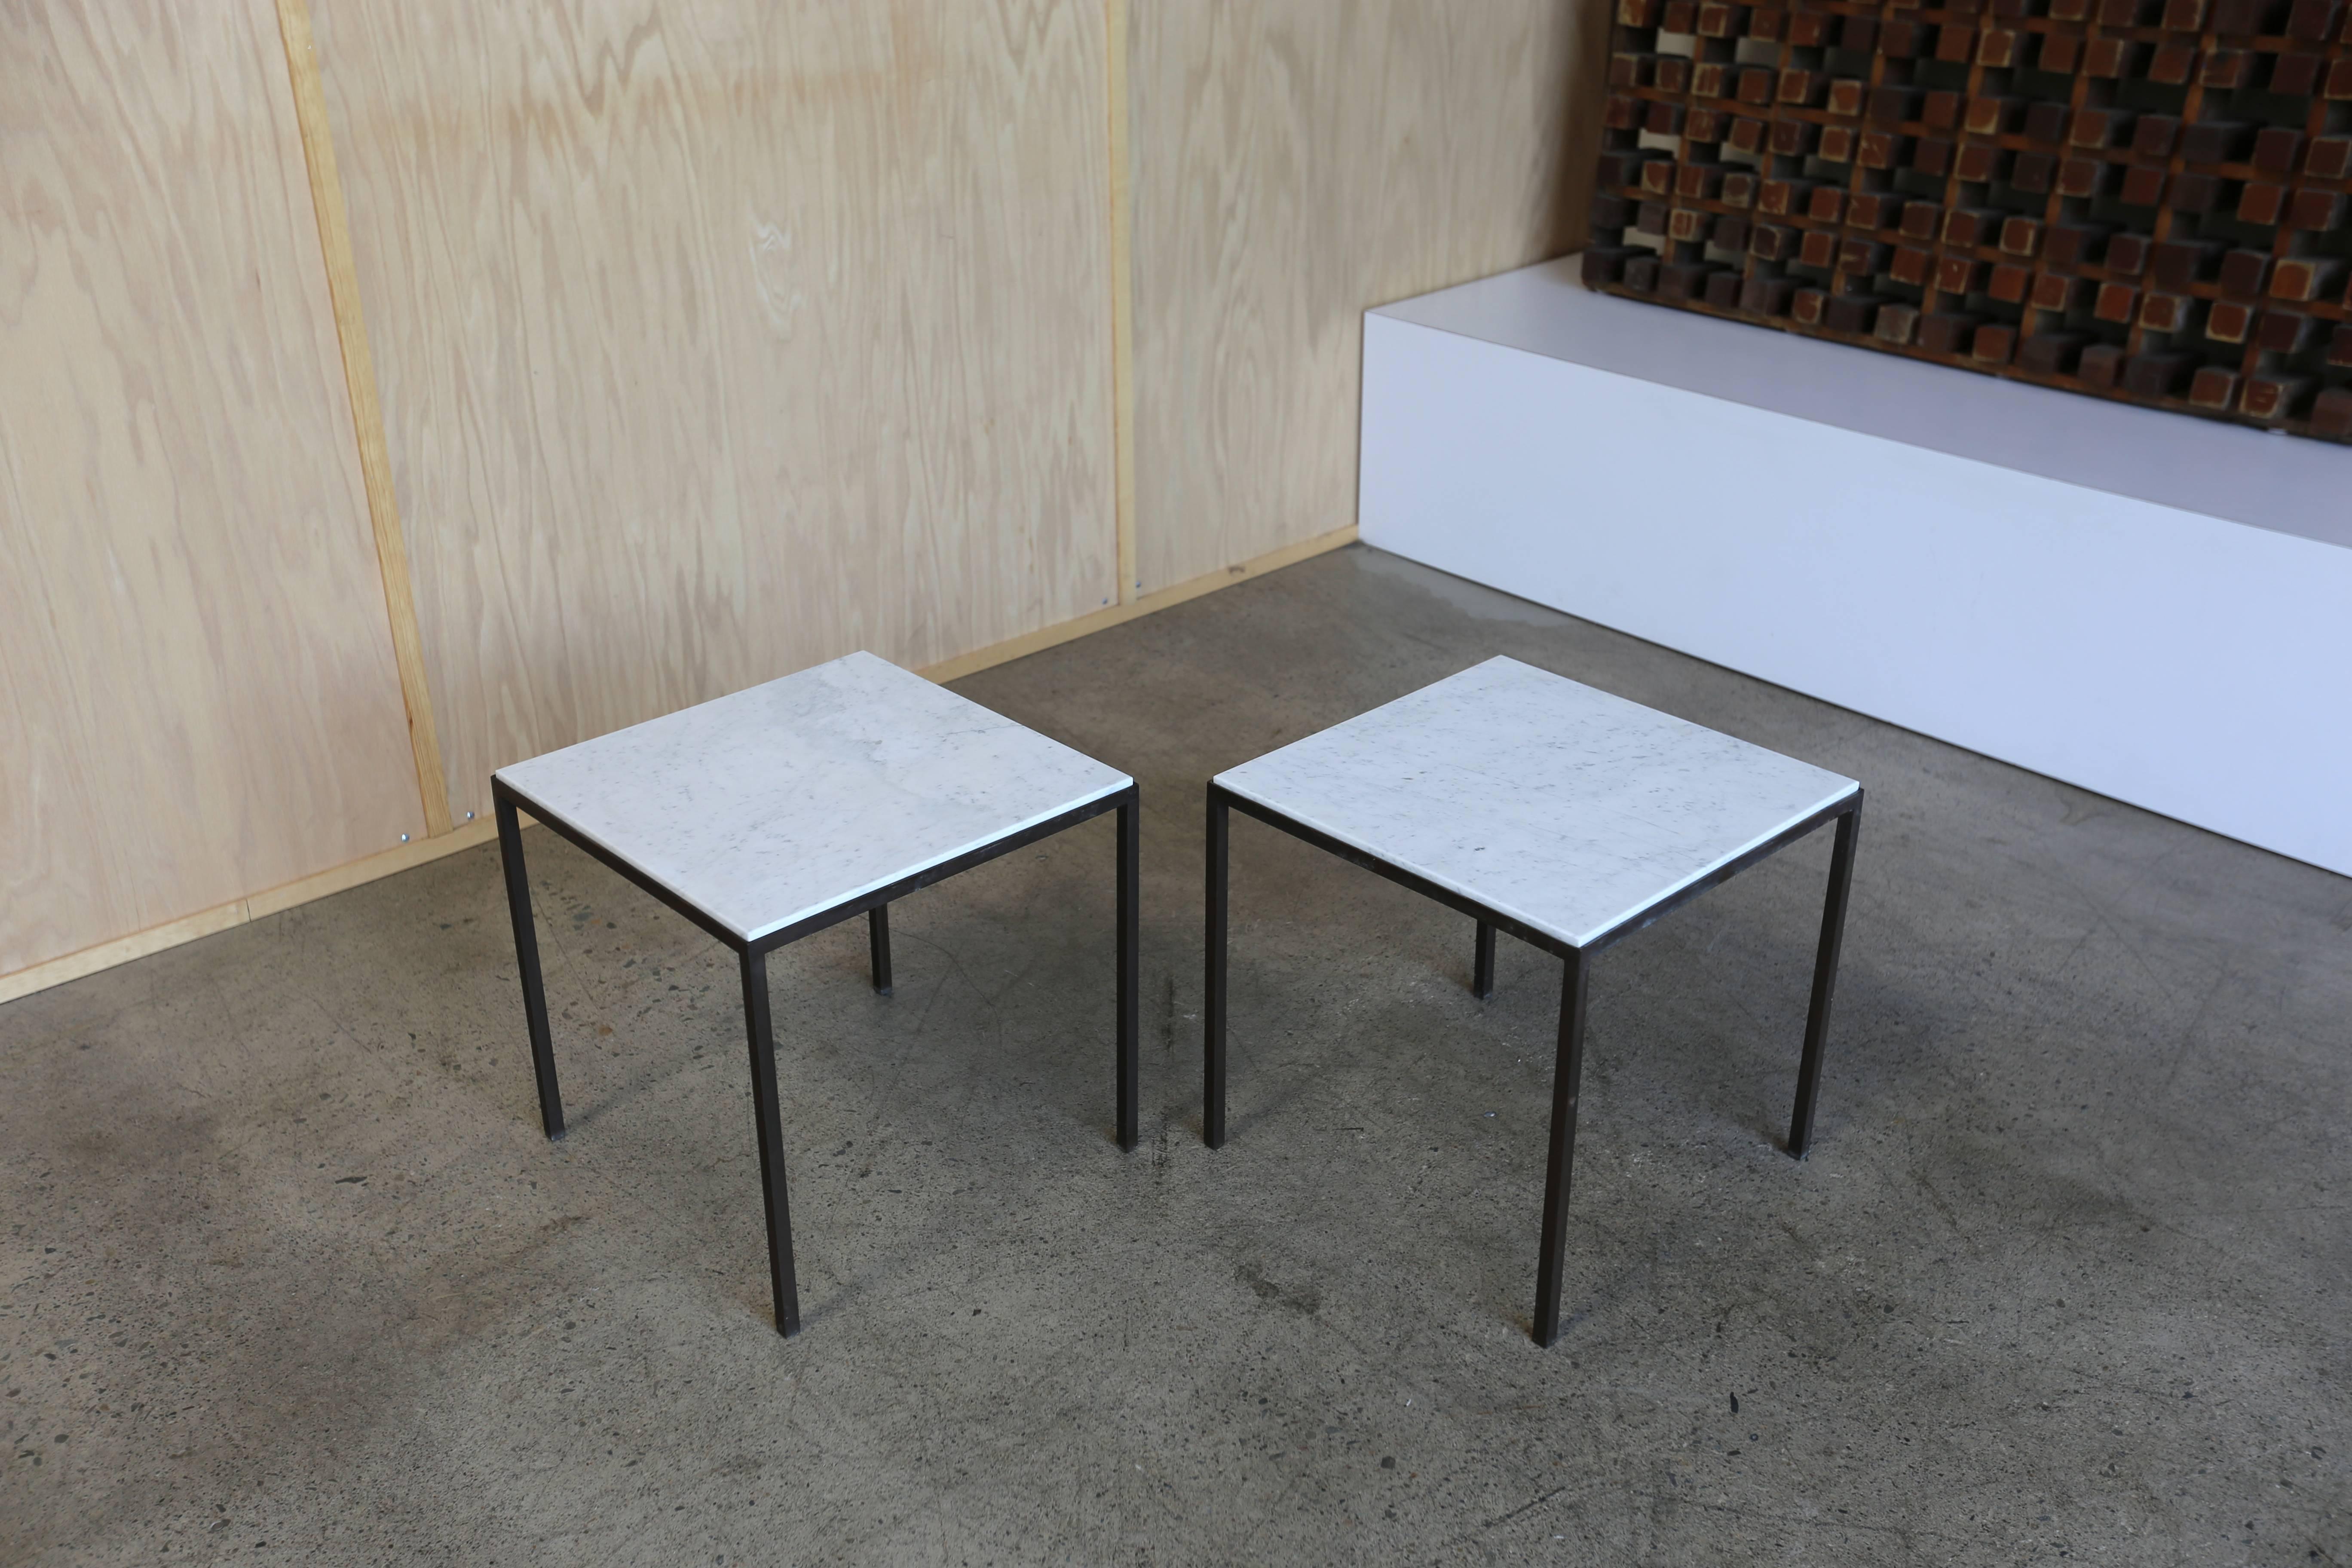 Pair of solid patinated brass and white marble side tables. Really nice original patina to the brass.